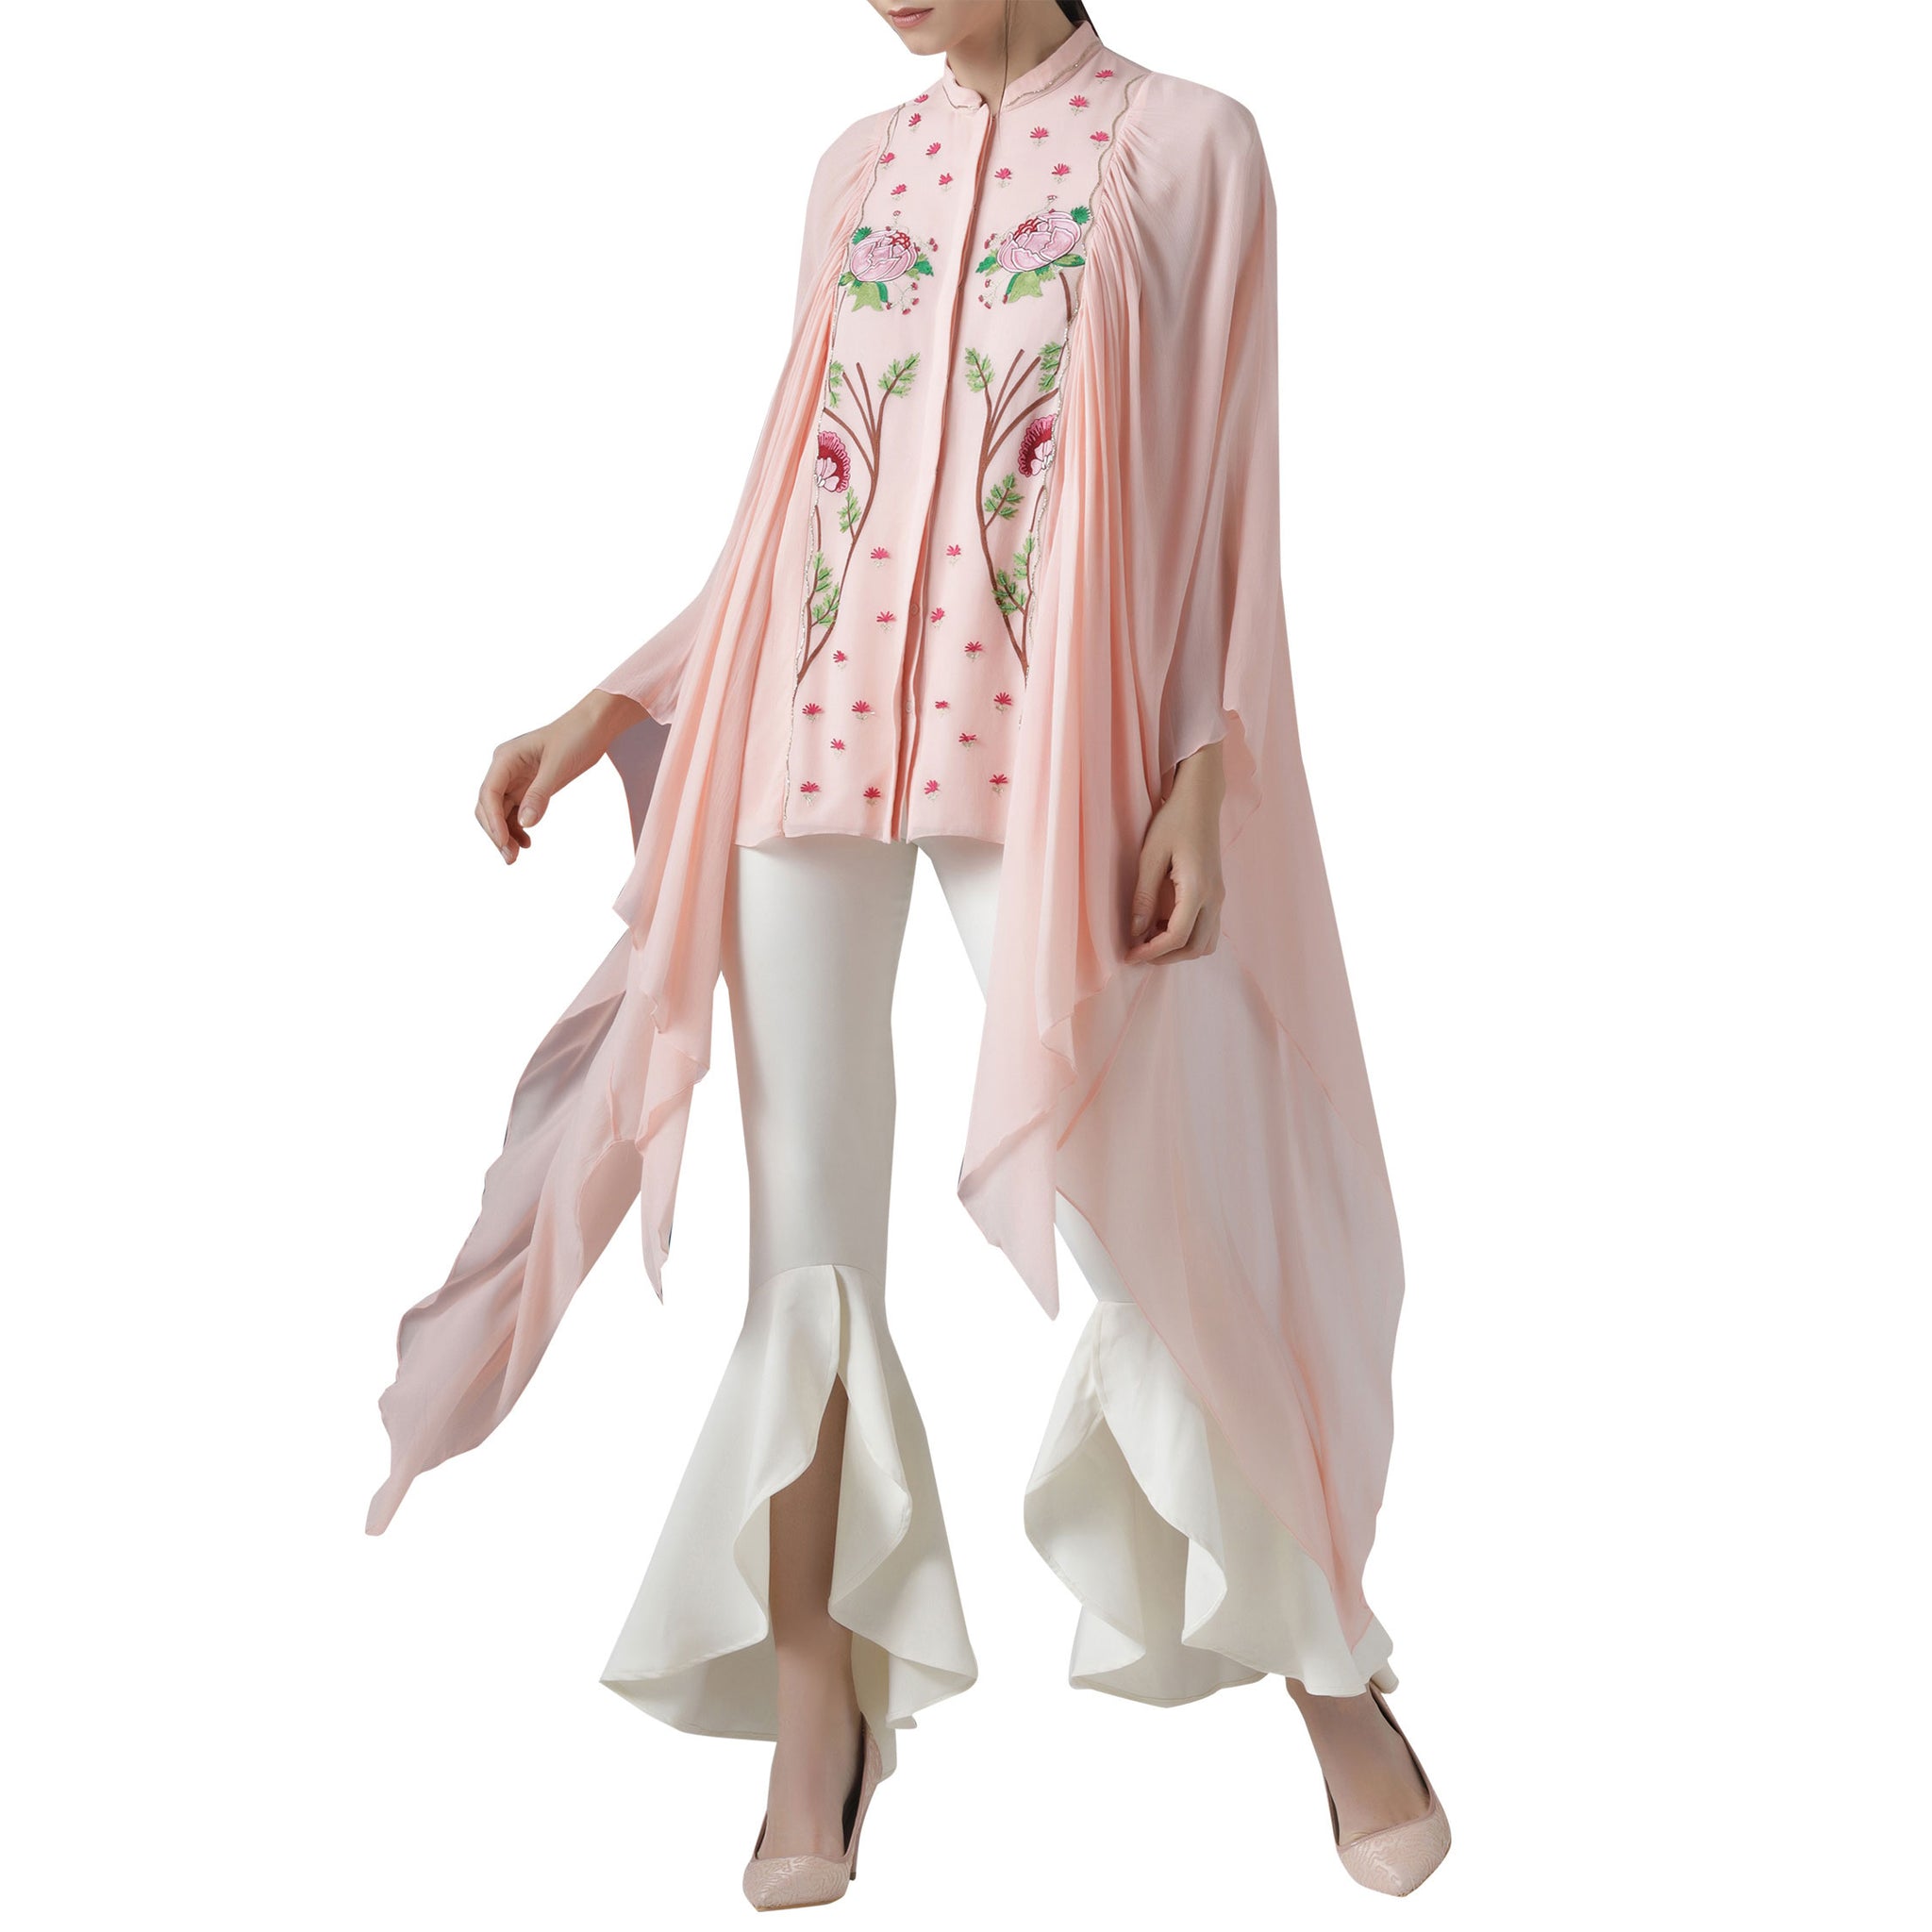 Embroidered Top with Exaggerated Sleeves